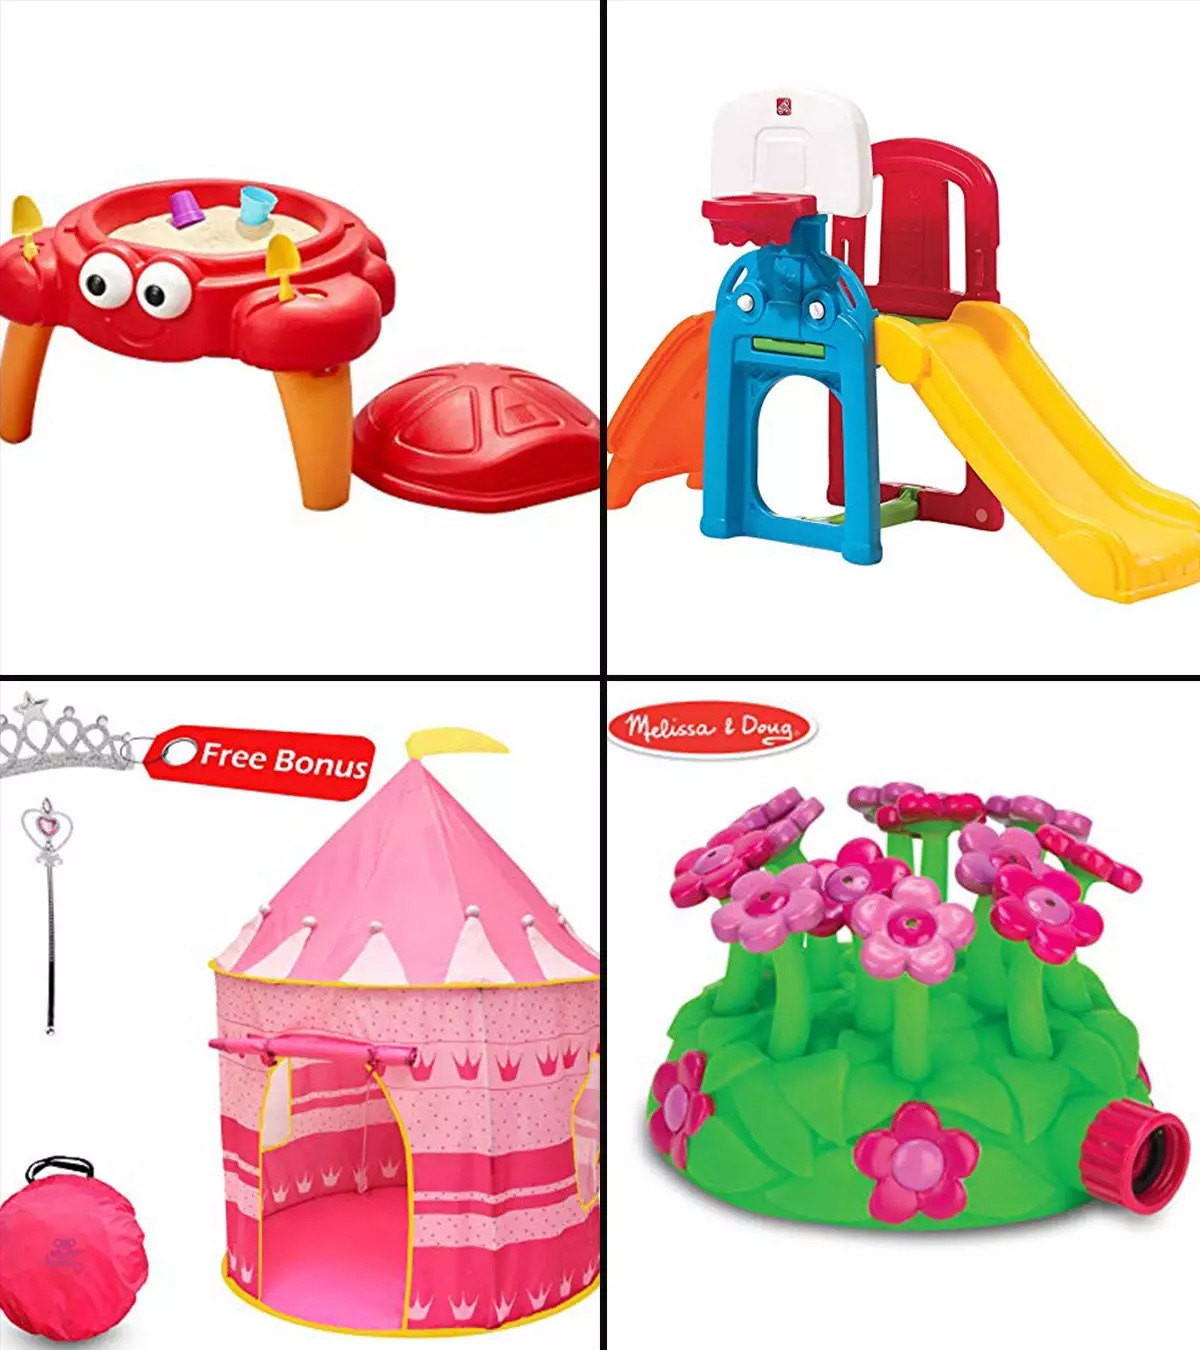 outdoor toys 2019